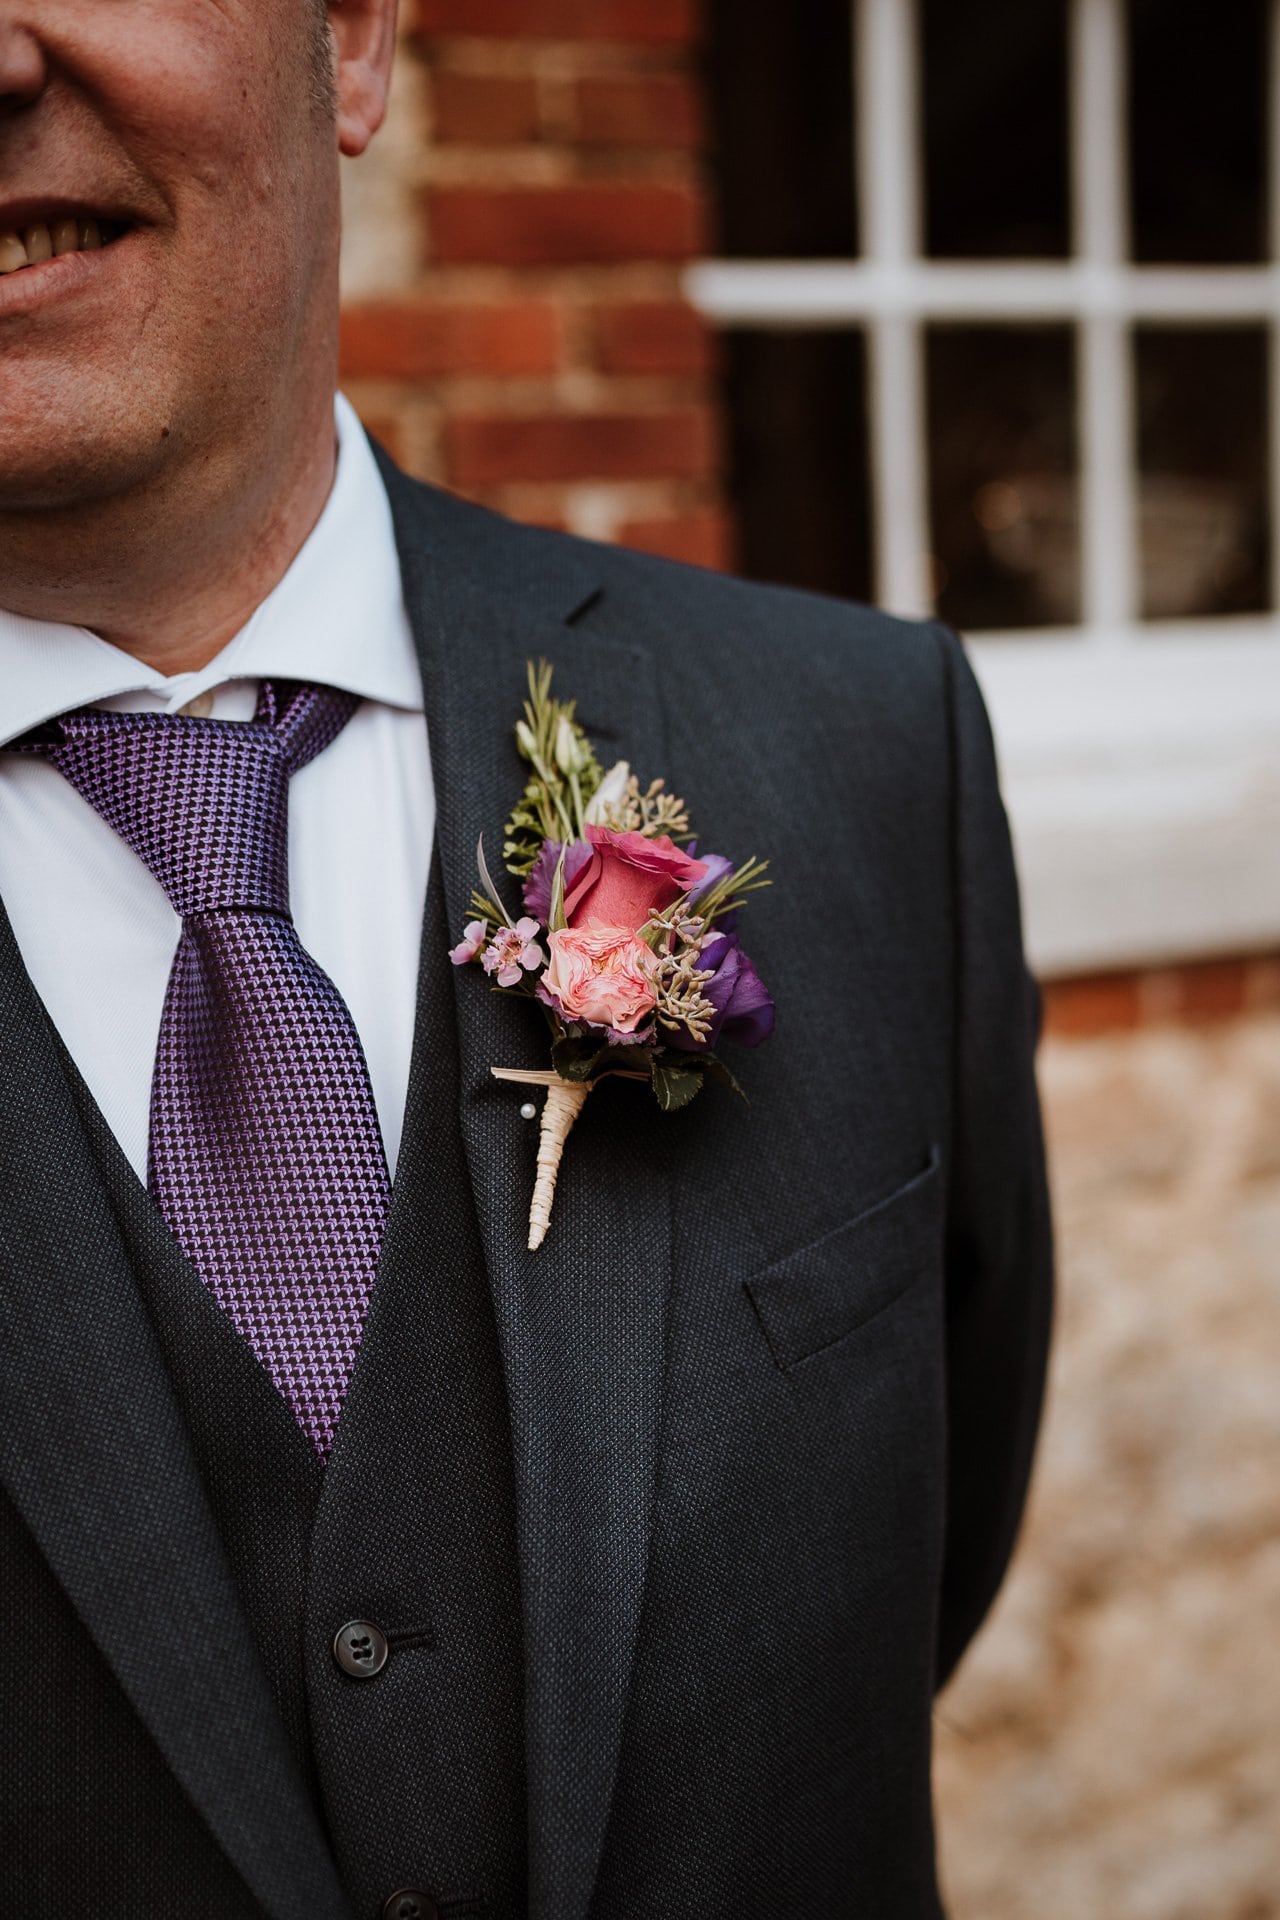 Close up image of grooms button hole with pink and purple flowers